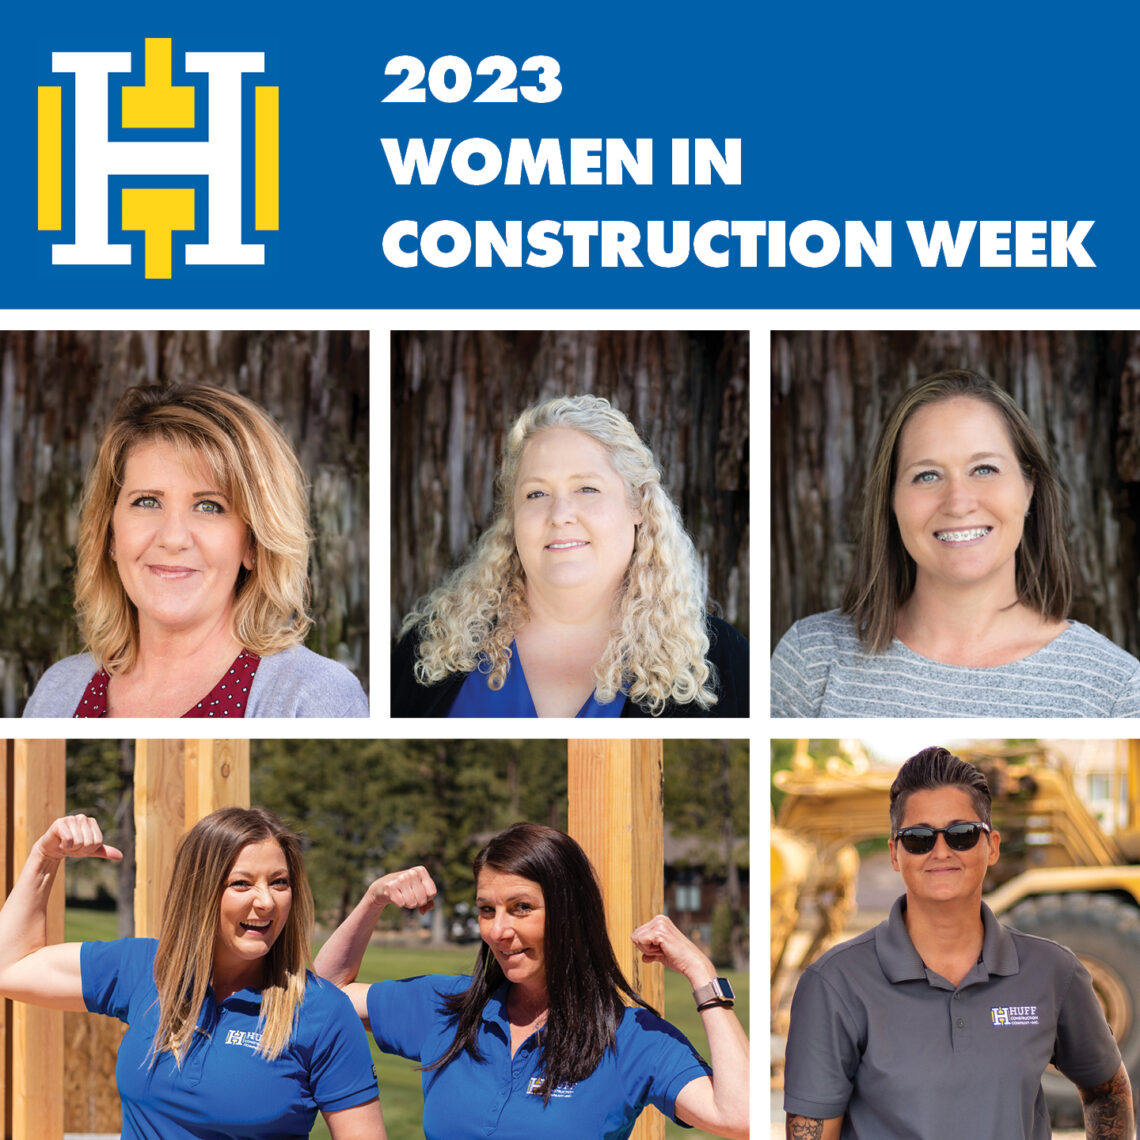 a photo highlighting women in construction week at Huff Construction Company. Women flex their arms on the job site. 